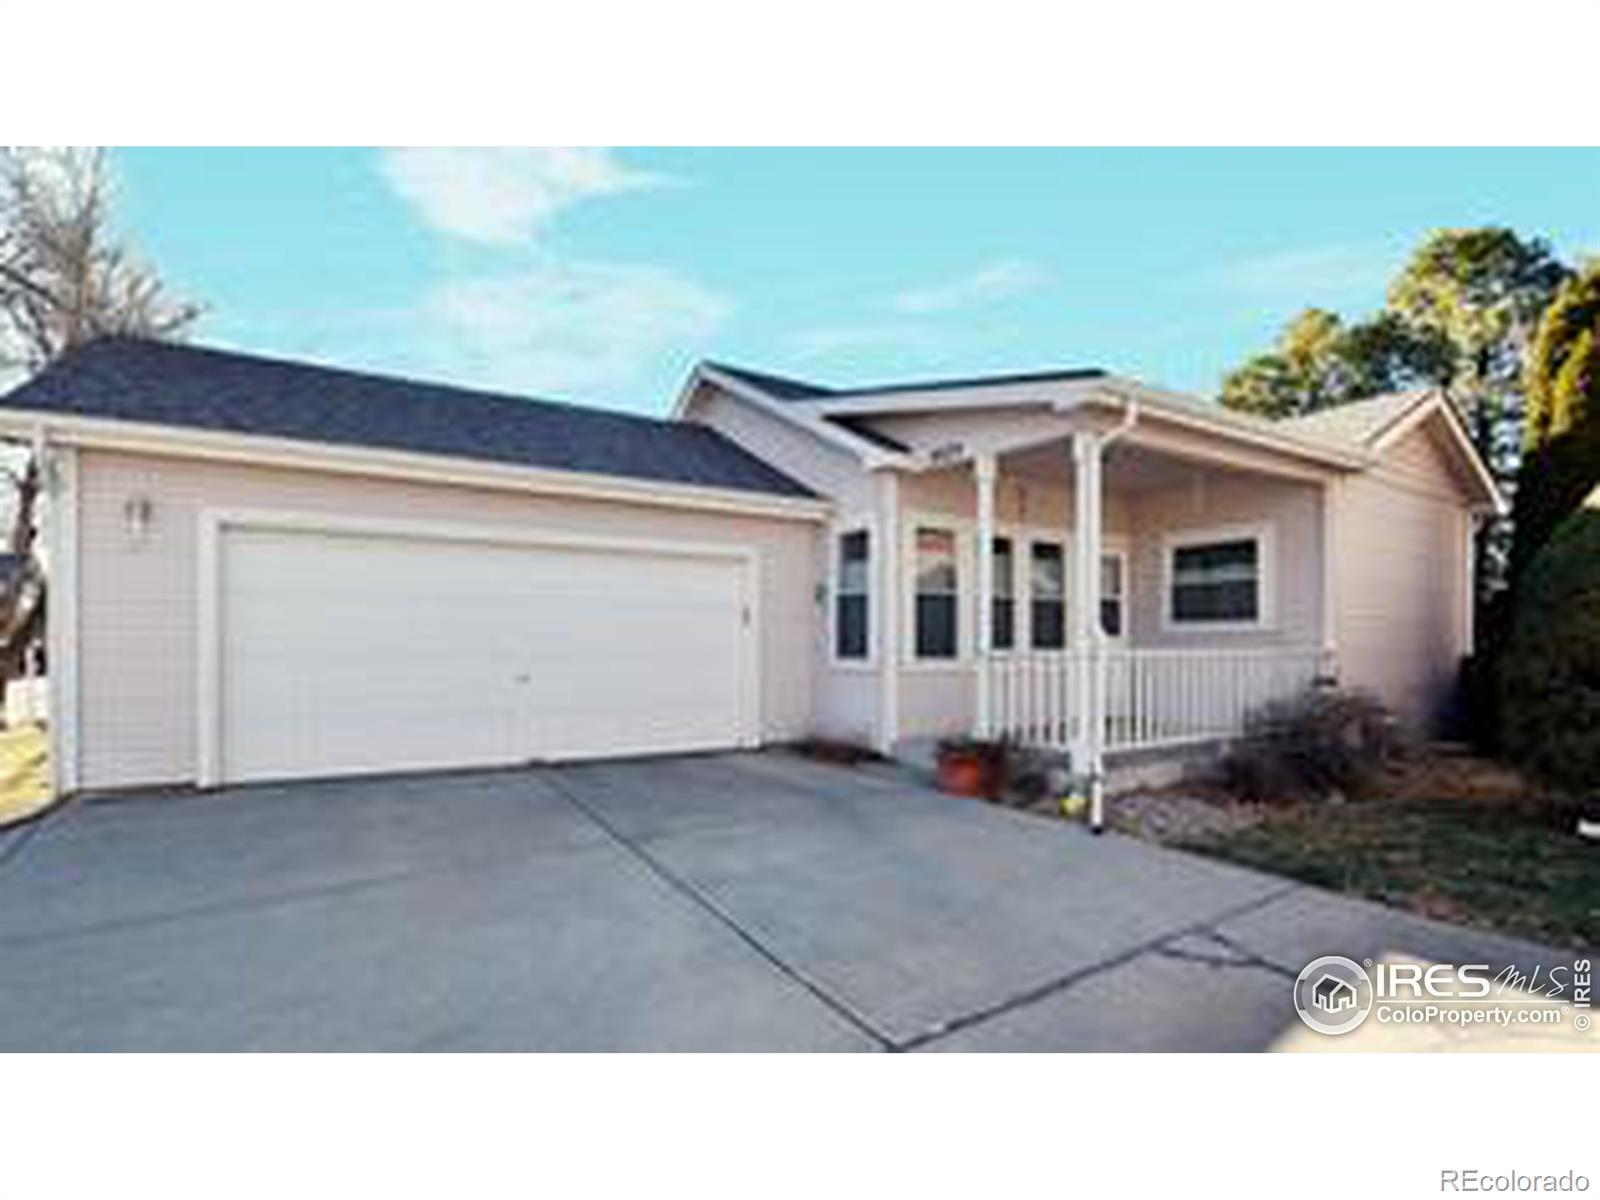 3575  Pike Circle, fort collins MLS: 4567891003878 Beds: 2 Baths: 2 Price: $459,000